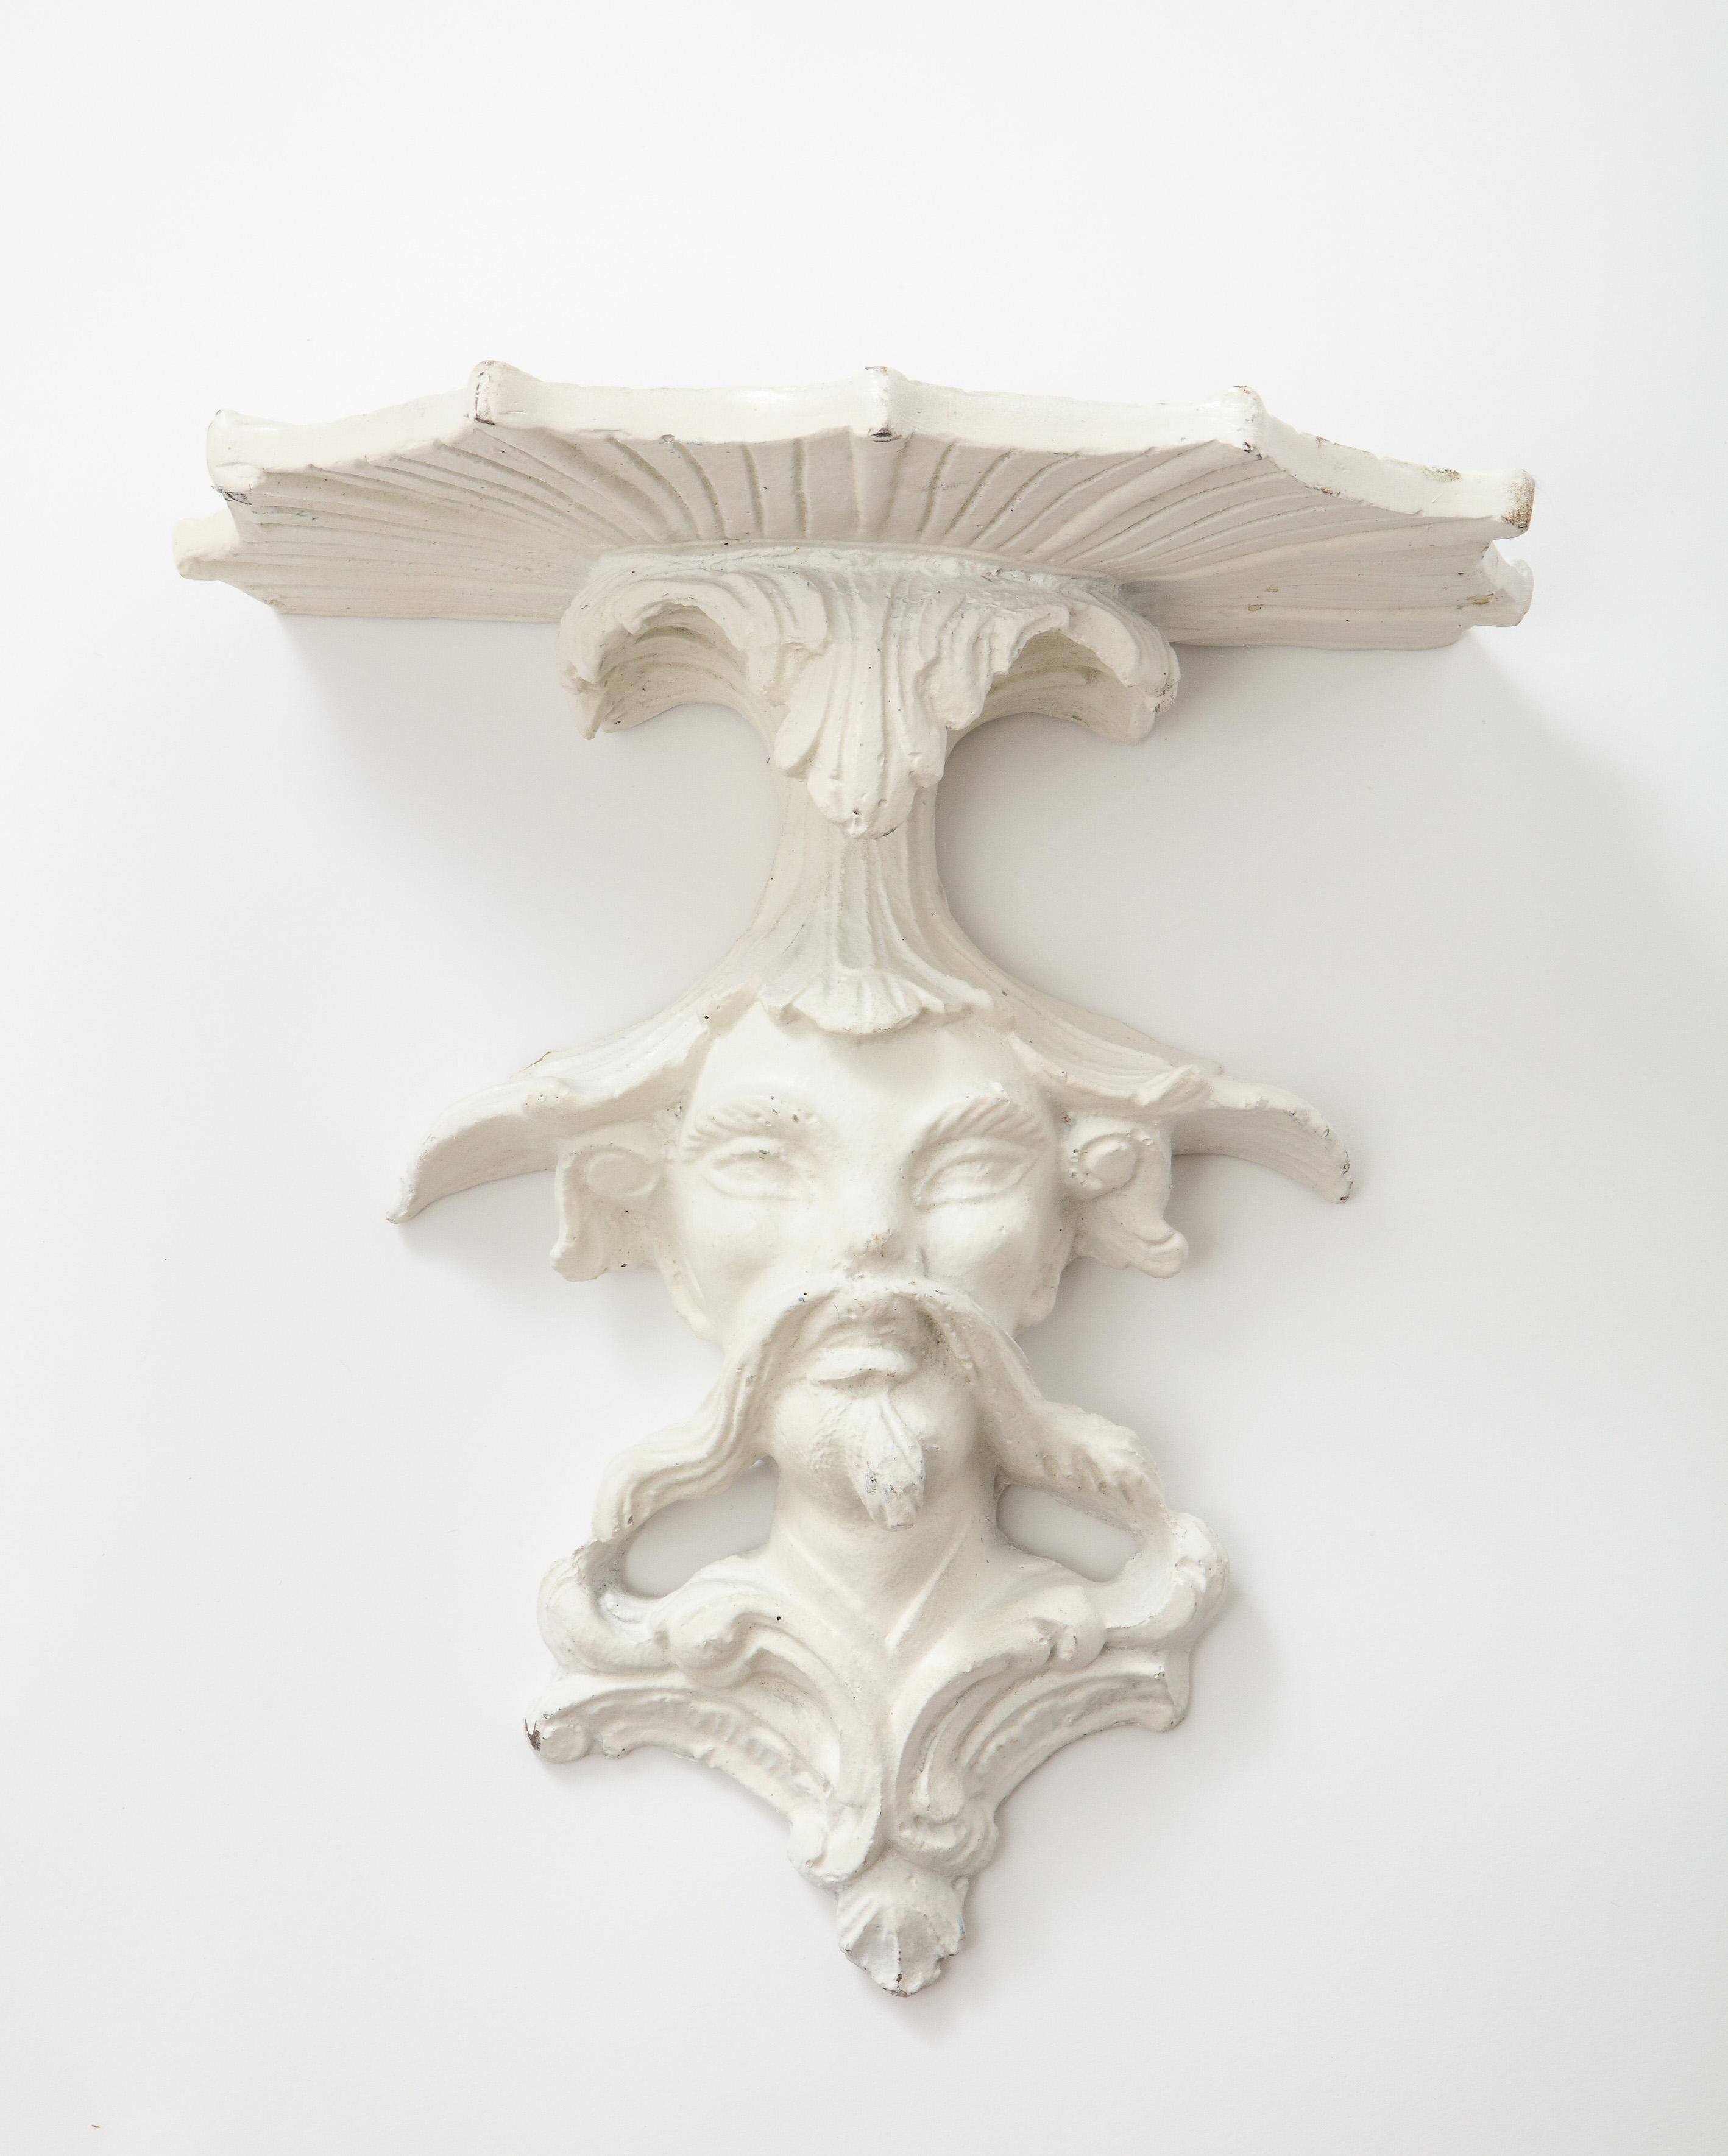 A fanciful concoction in the Brighton Pavilion style with each incorporating a bust of a Chinese court figure surmounted by a foliate spray supporting a fan-shaped shelf. Made of wood coated in gesso.